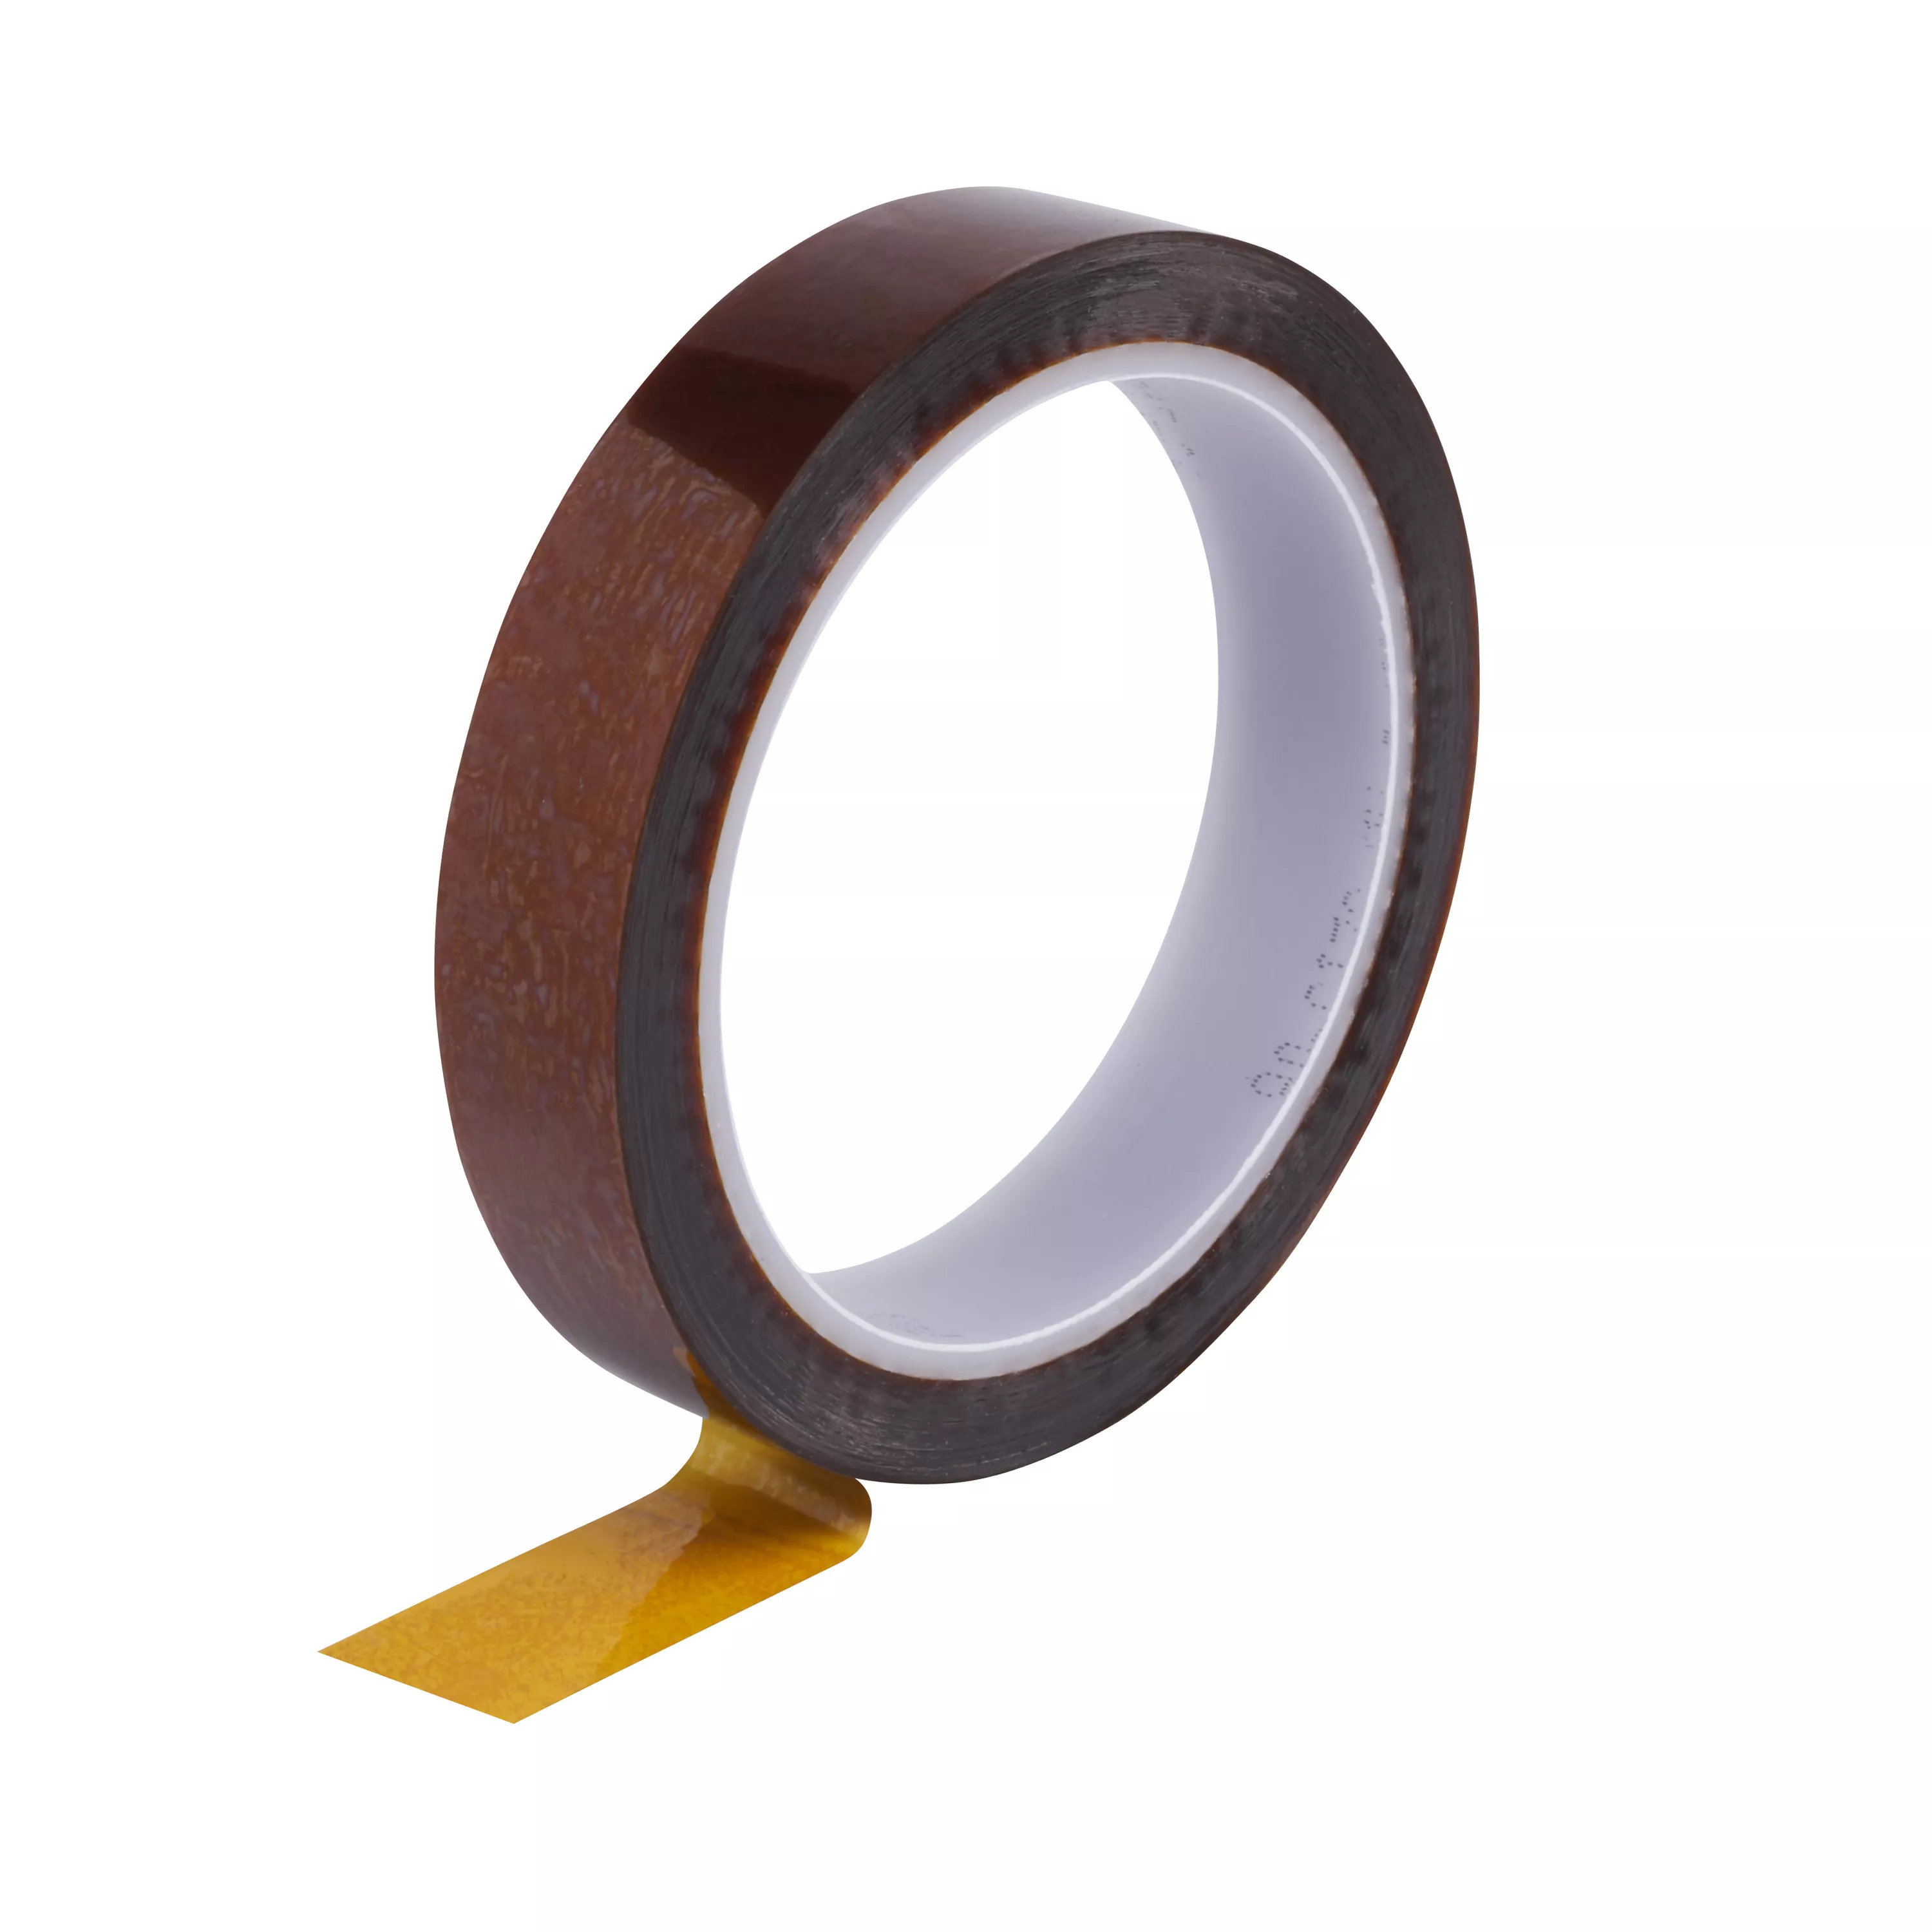 3M™ Polyimide Film Electrical Tape 1205, 19 mm x 33 m, 12 Rolls/Case